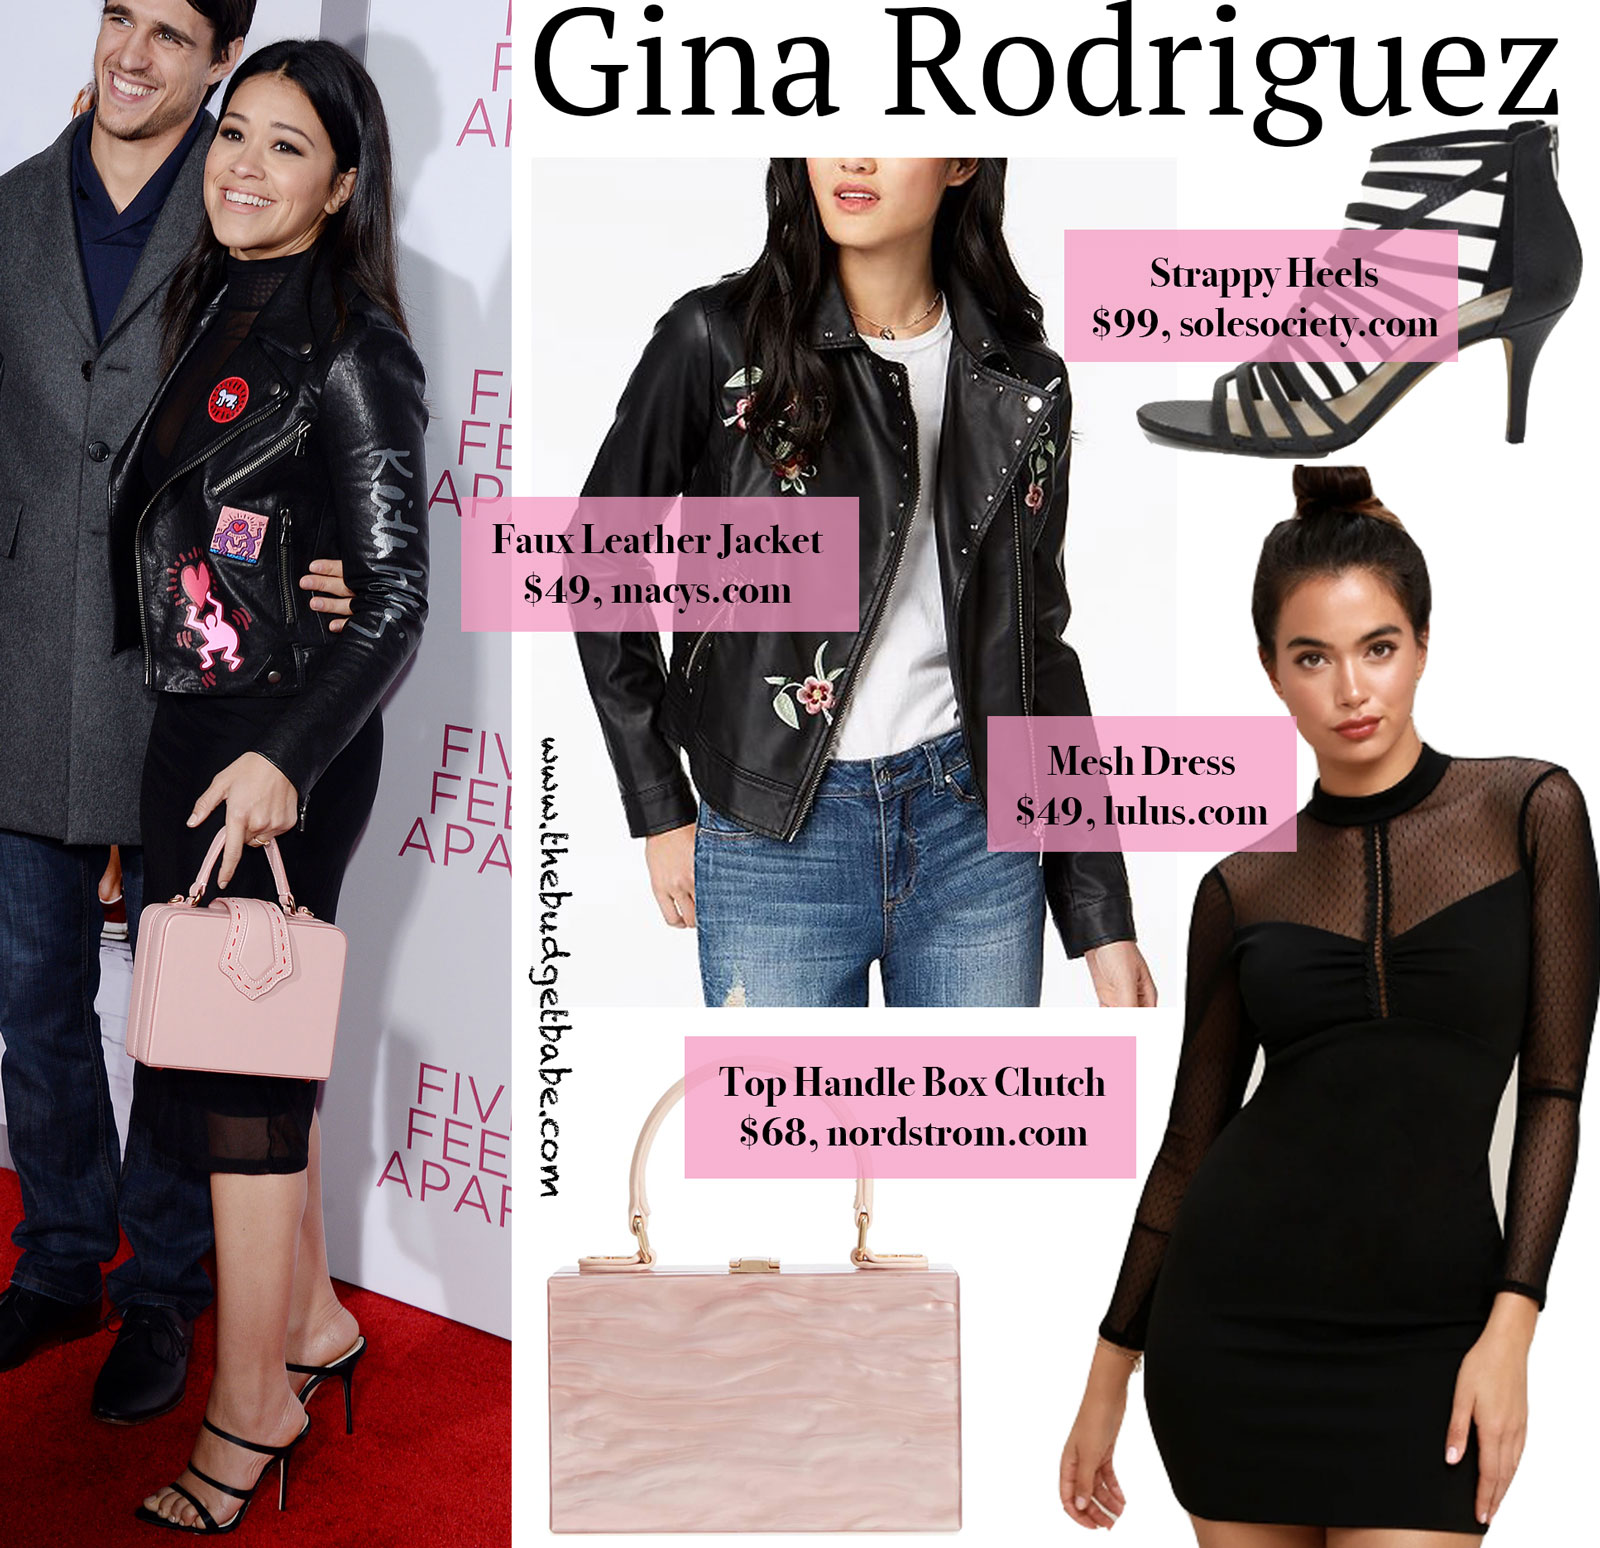 Gina Rodriguez Strappy Heels and Leather Embroidered Jacket